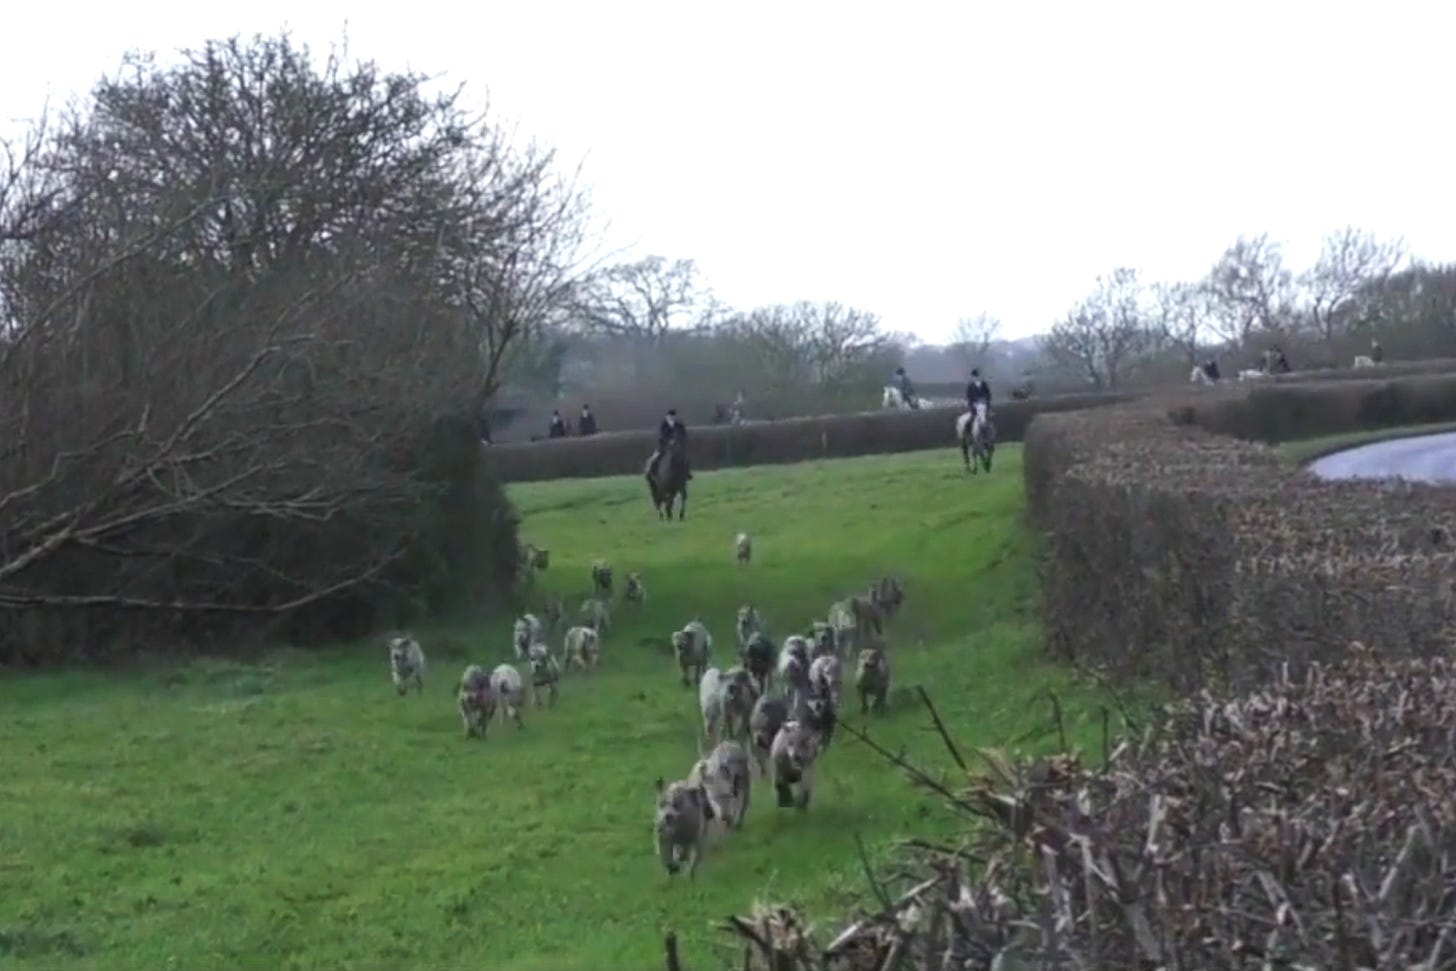 Blackmore and Sparkfrd Vale Hunt's pack of hounds run towards the camera with several riders following behind.